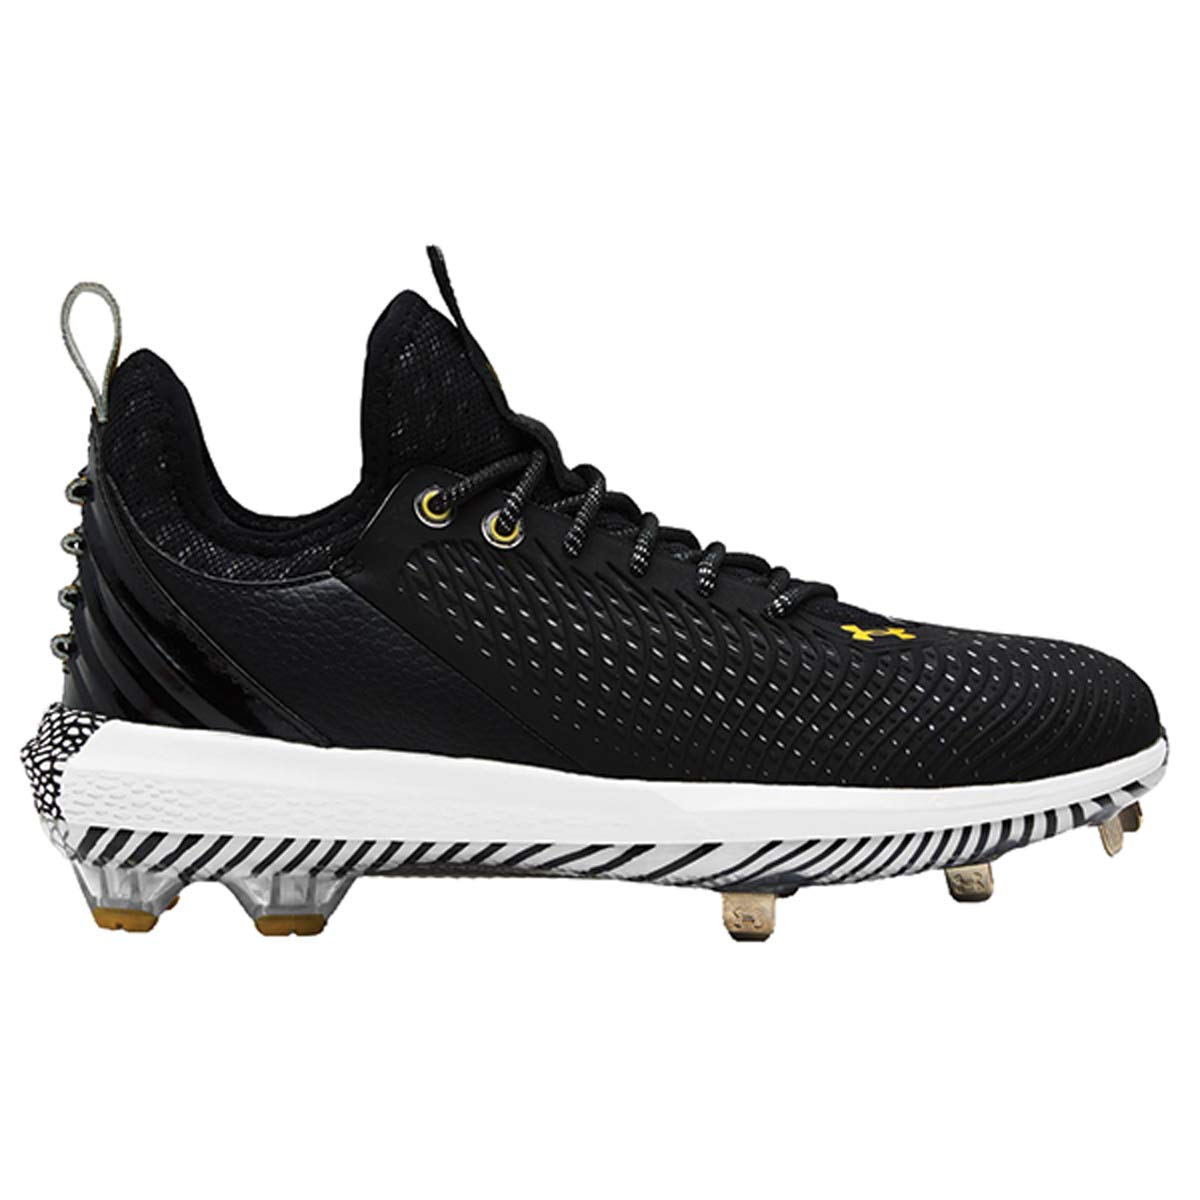 Under Armour Harper 5 Low ST Mens Baseball Cleats - Unmatched Comfort and  Performance